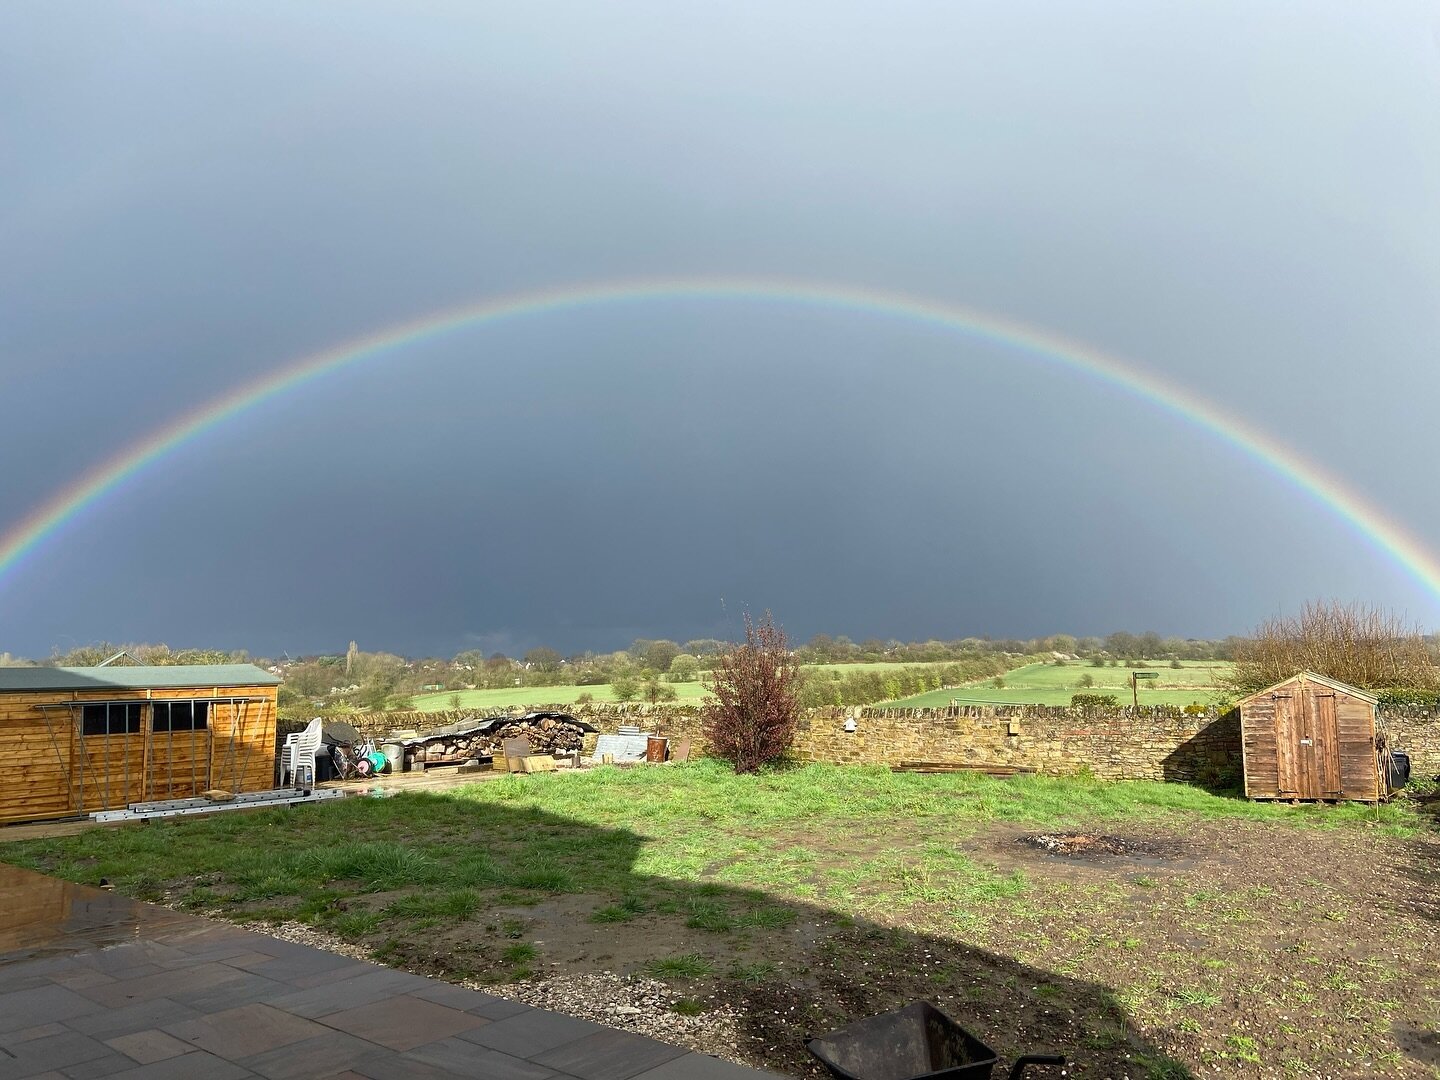 Sunshine and showers make incredible rainbows framing the view🌈 (try not to notice our scruffy back garden, it&rsquo;s waiting for it&rsquo;s beauty treatment landscaping)😀

If you would like to come and share our beautiful spot in Derbyshire for a